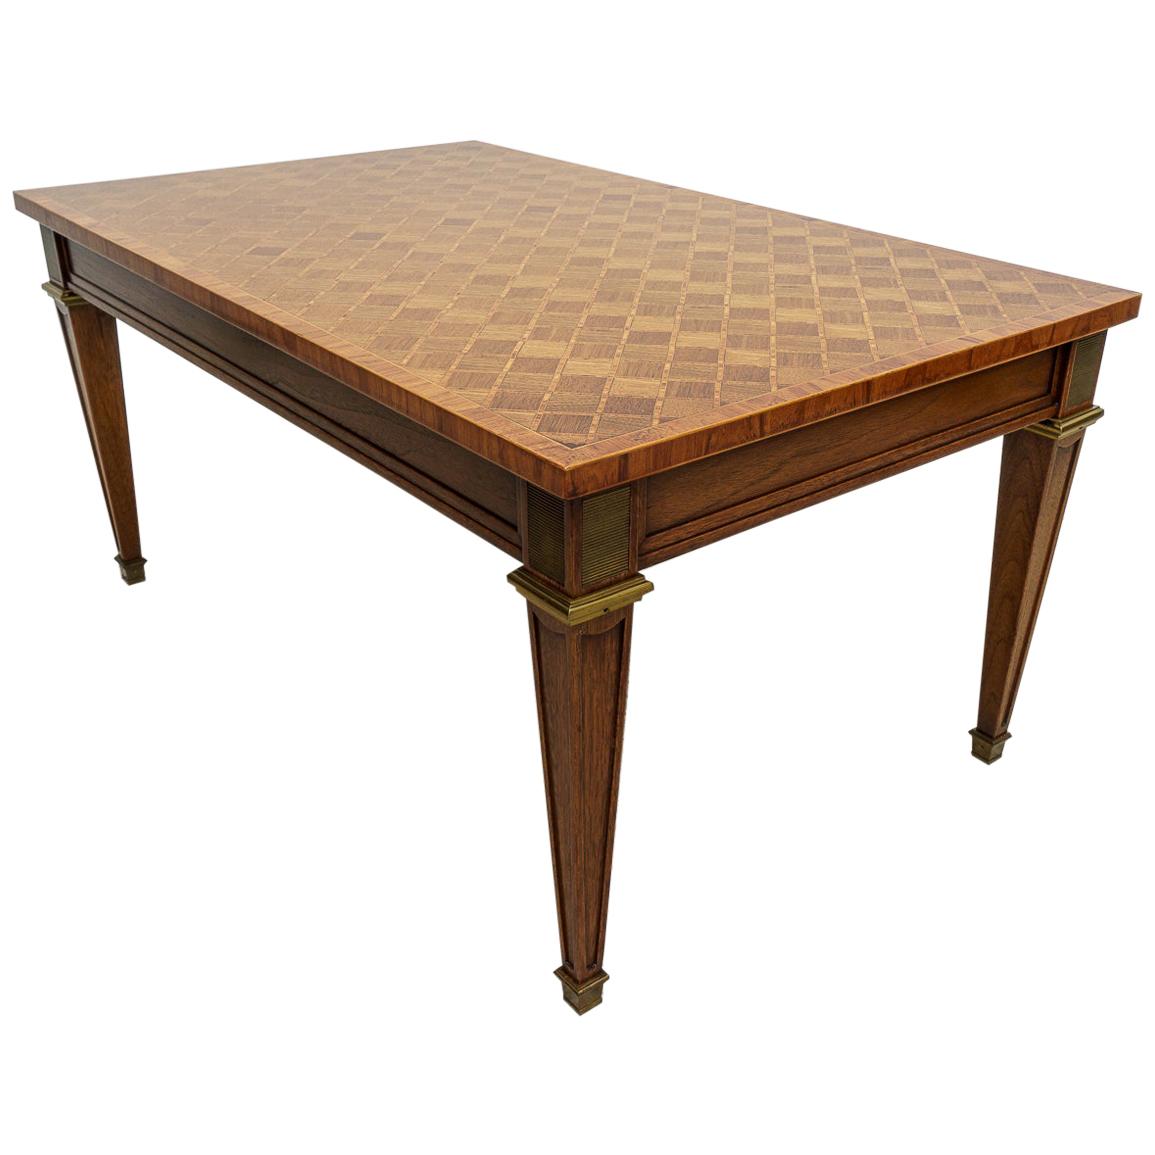 1940s Parquet Cocktail Table For Sale at 1stDibs | 1940s coffee table, 1940 coffee  table styles, 1940 table